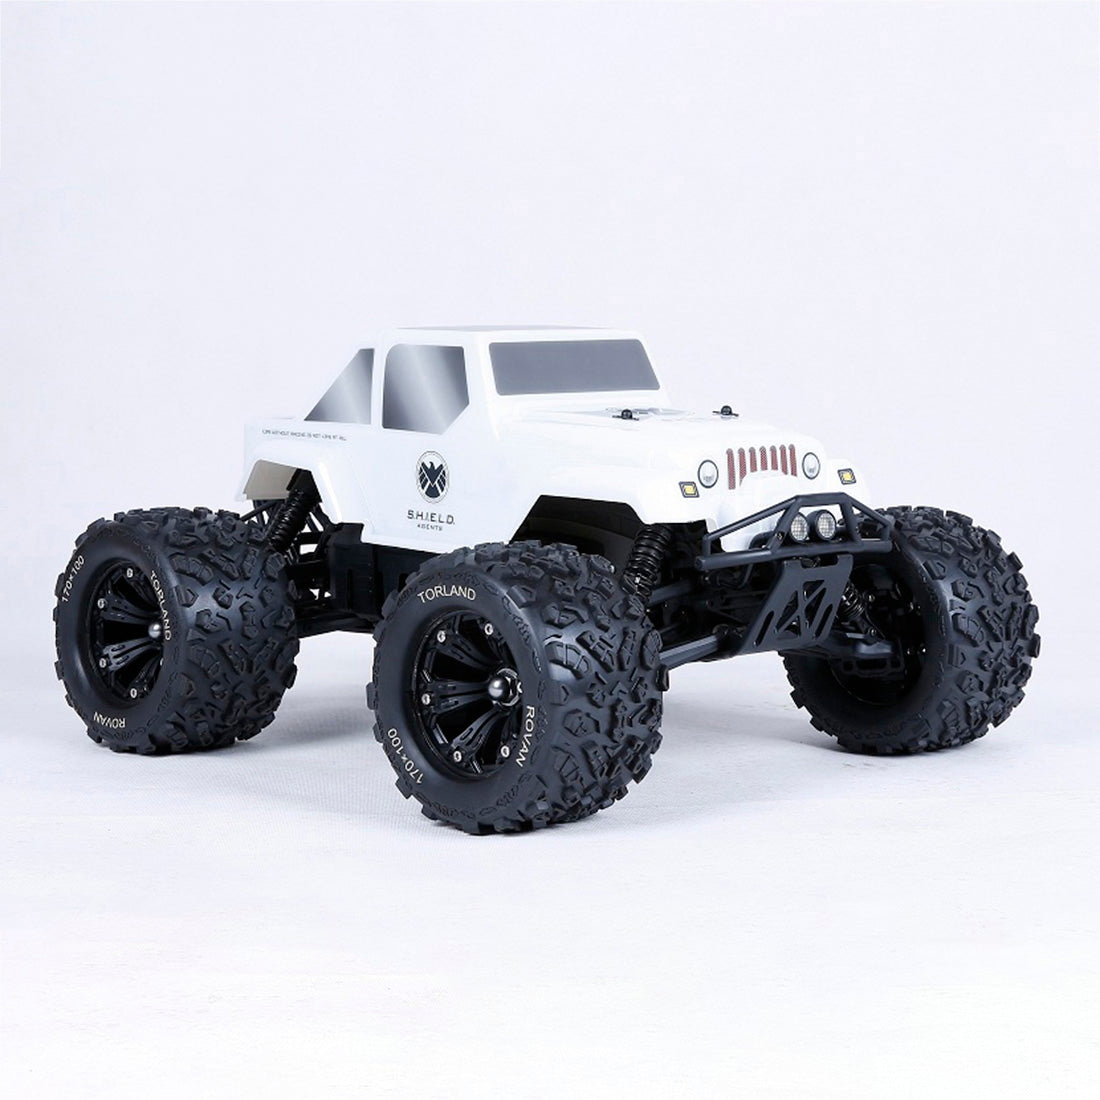 Rovan TORLAND EV4 1/8 Electric 4WD Brushless Vehicle 2.4G RC Pickup Truck with Battery and Charger